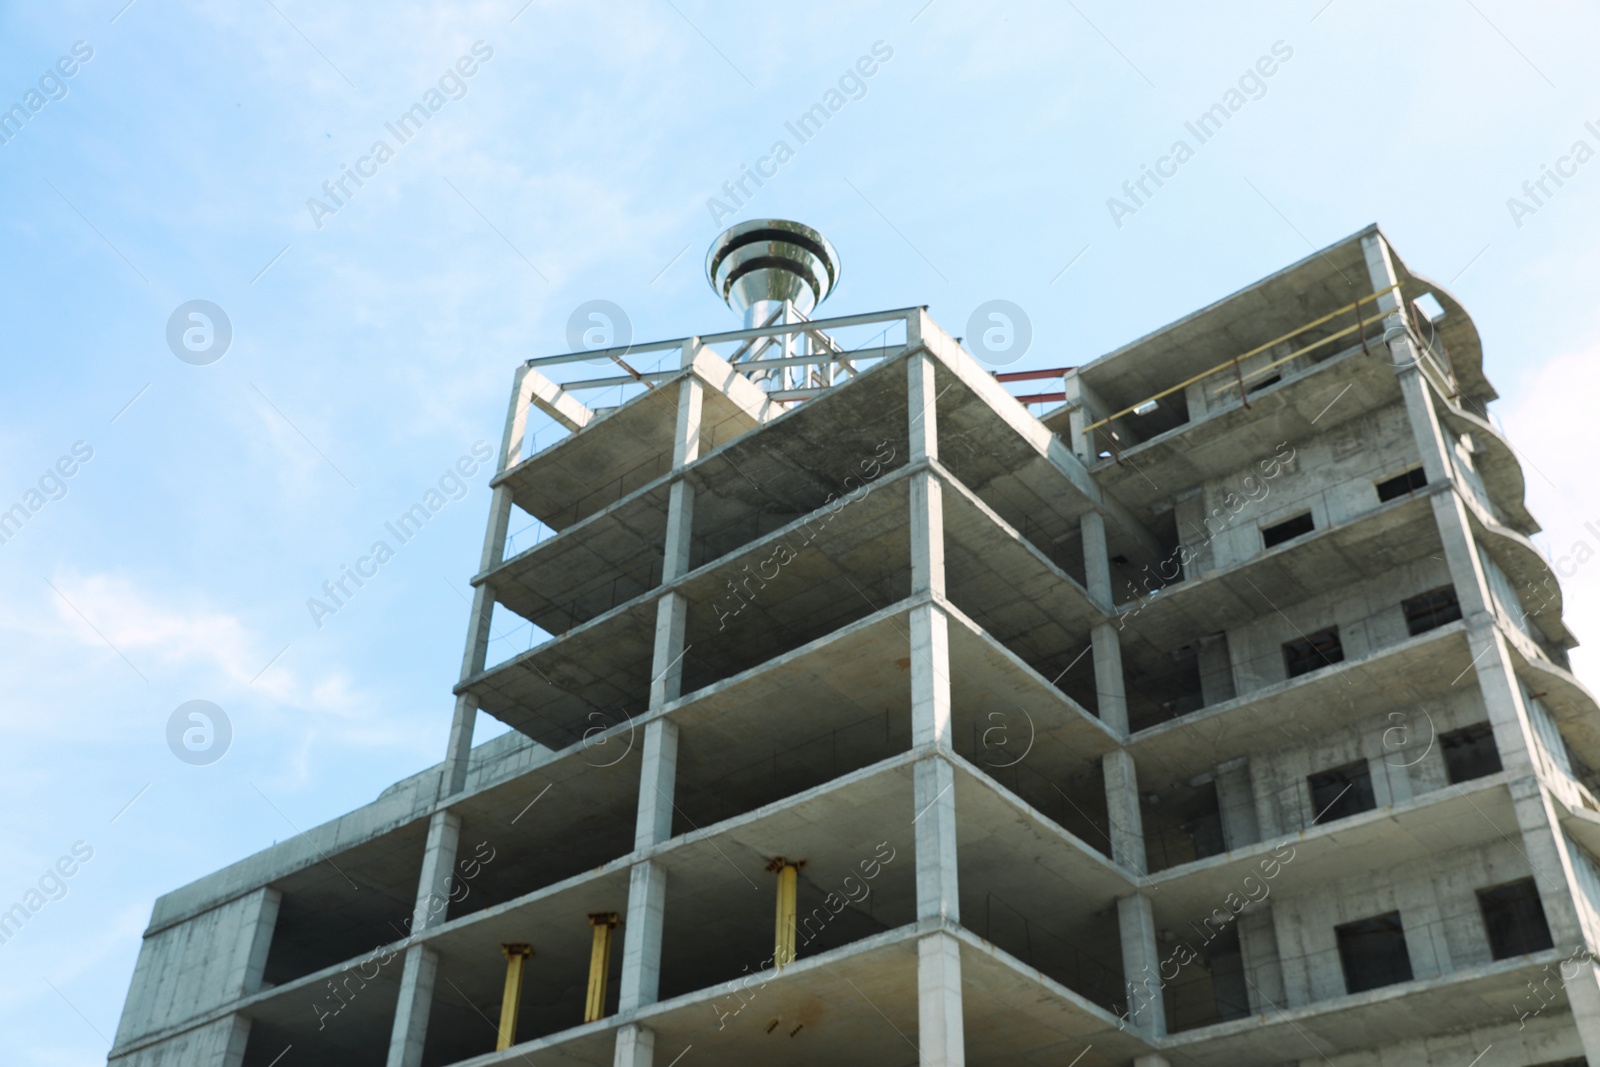 Photo of View of unfinished building outdoors. Construction safety rules